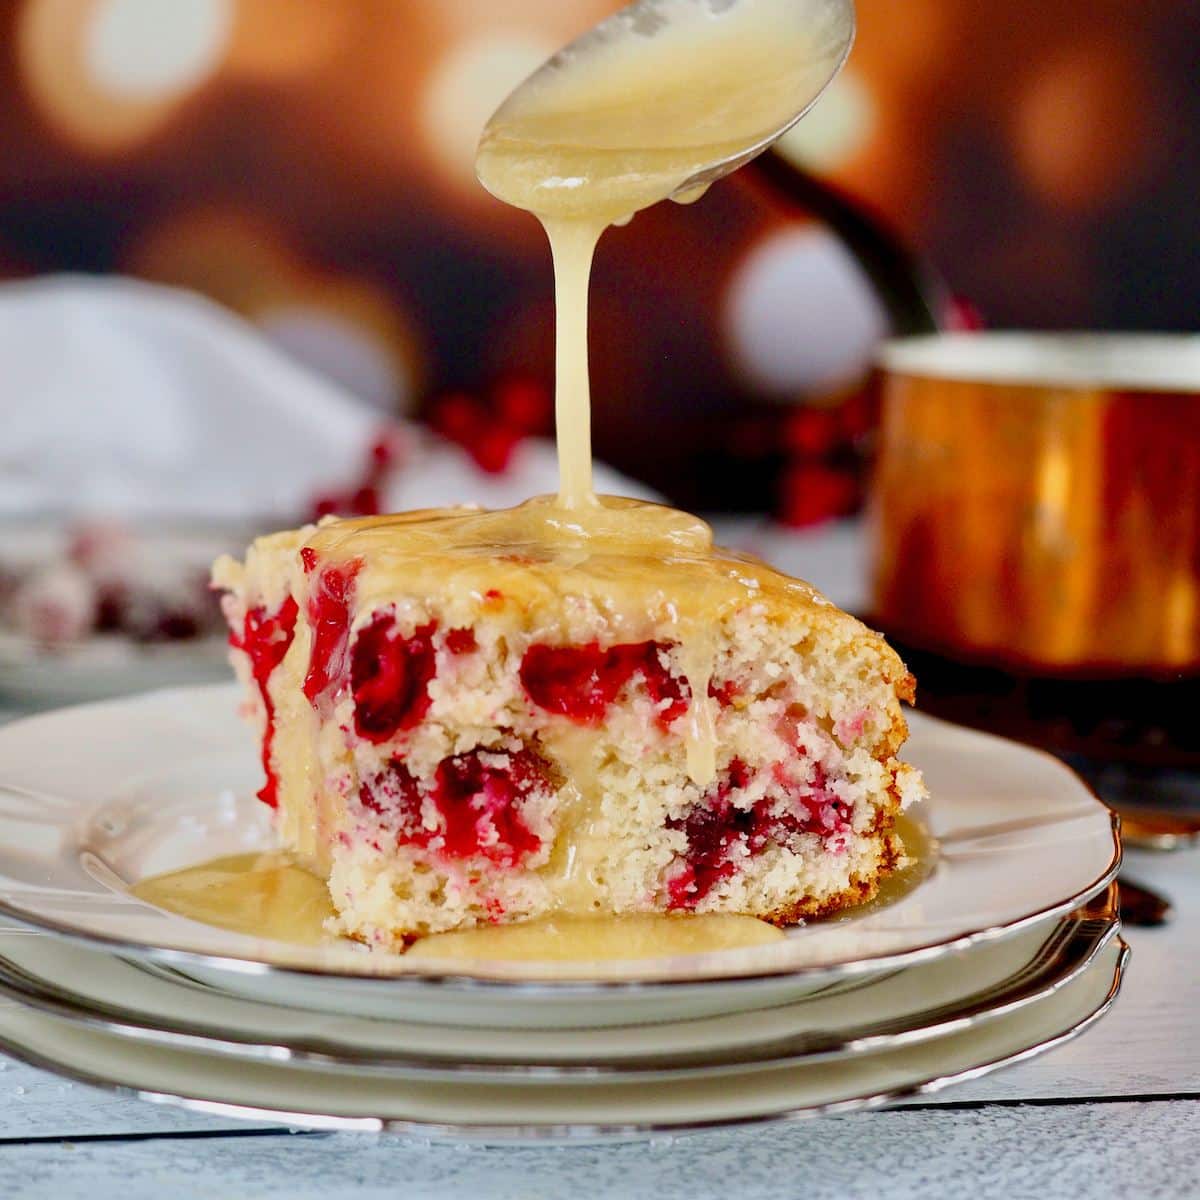 A square of rich Cranberry Christmas cake on a pretty plate being drizzled with warm vanilla butter sauce.